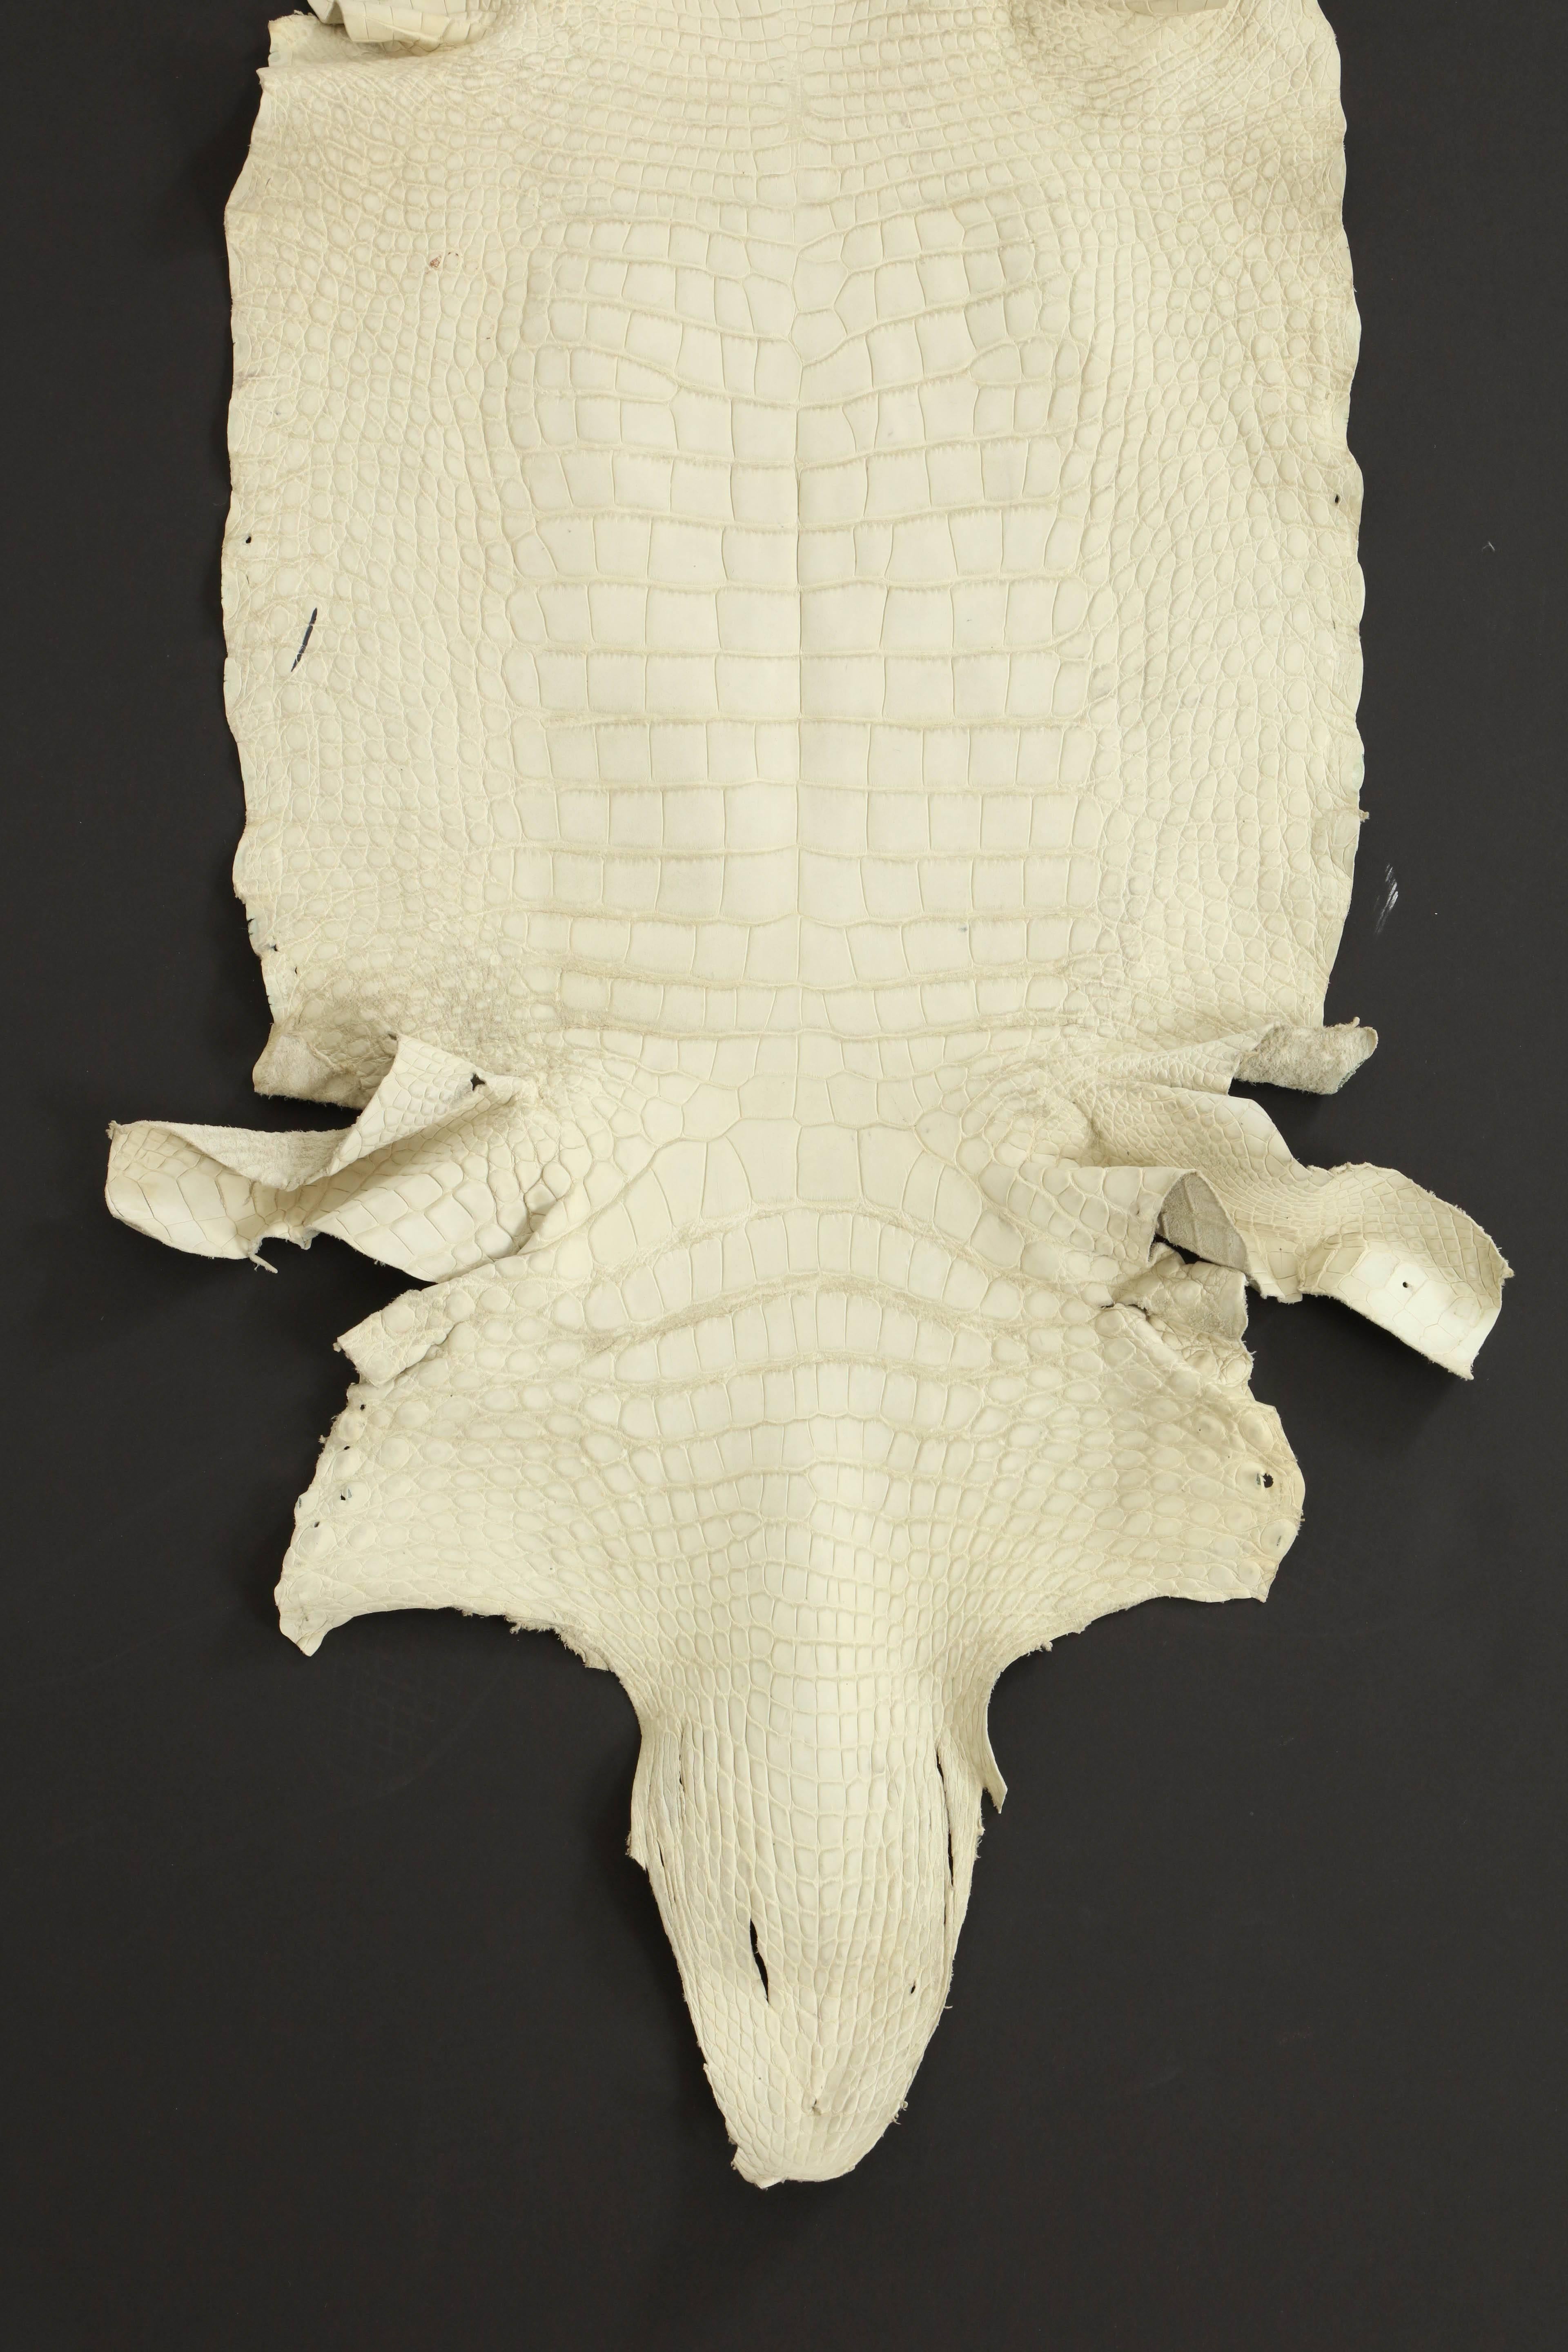 Decorative white crocodile skin for a rug or to drape over your chair.
The skin is between 18 inches-25 inches wide and 80 inches long.